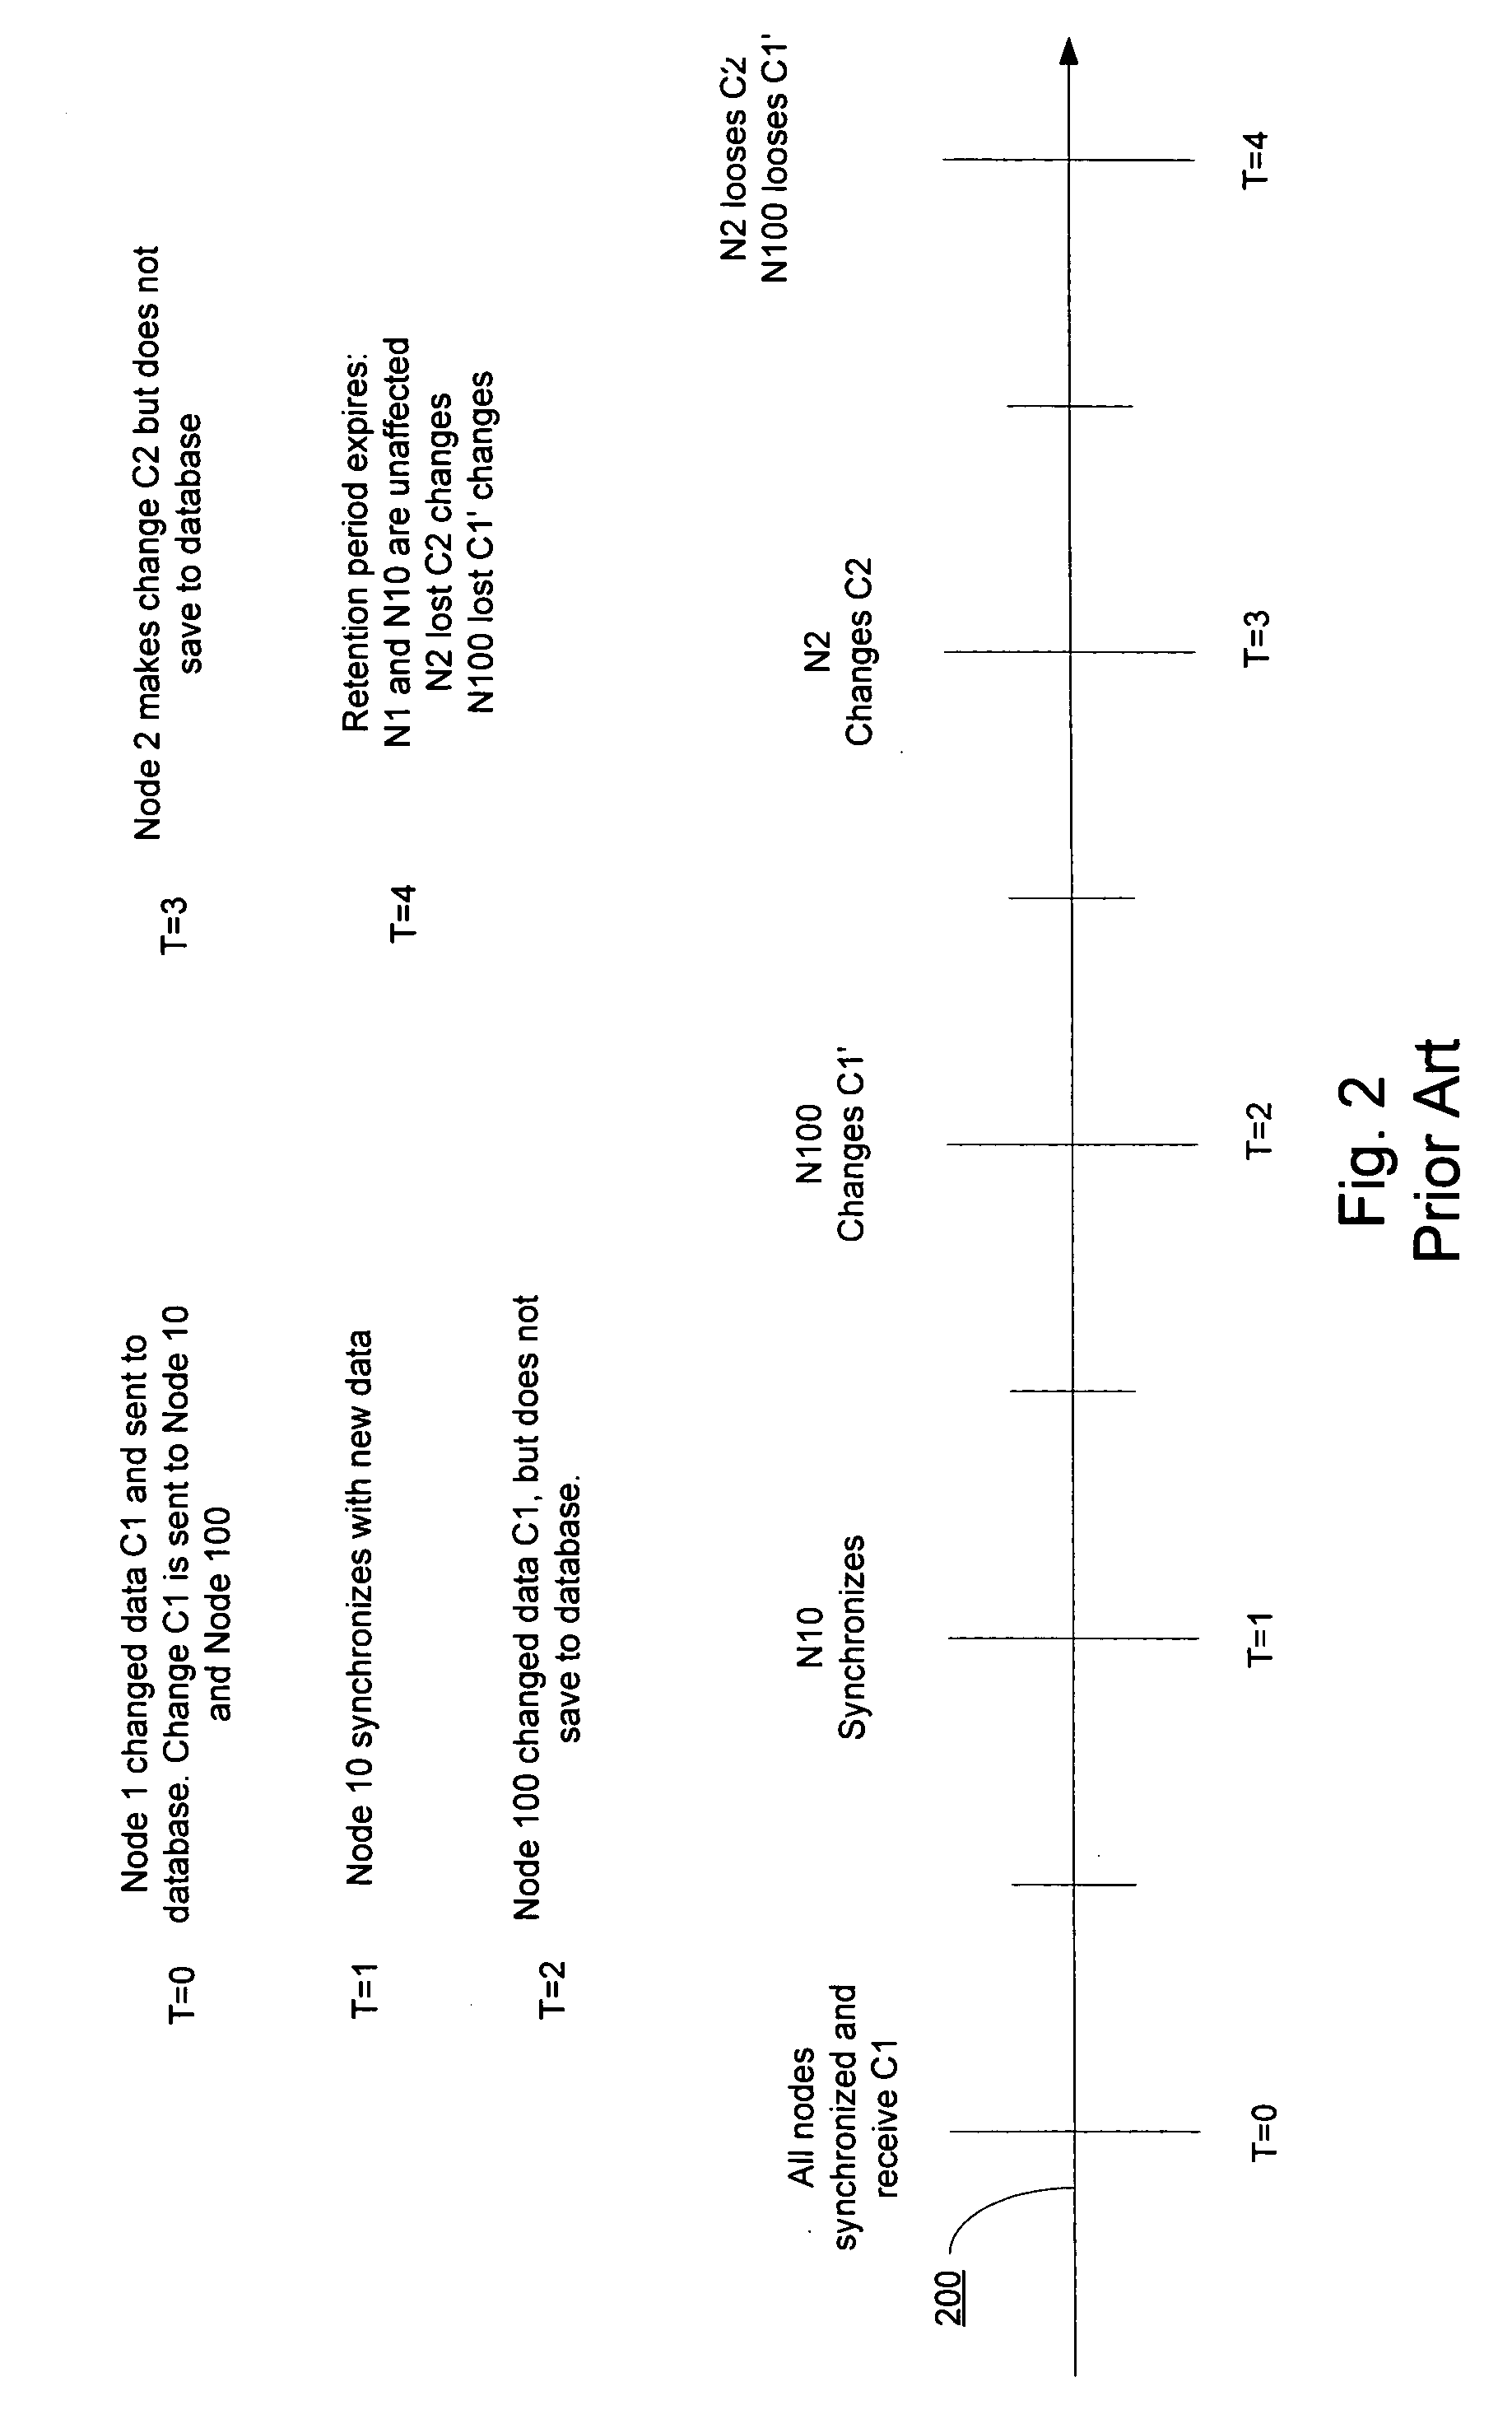 Method and system for partition level cleanup of replication conflict metadata